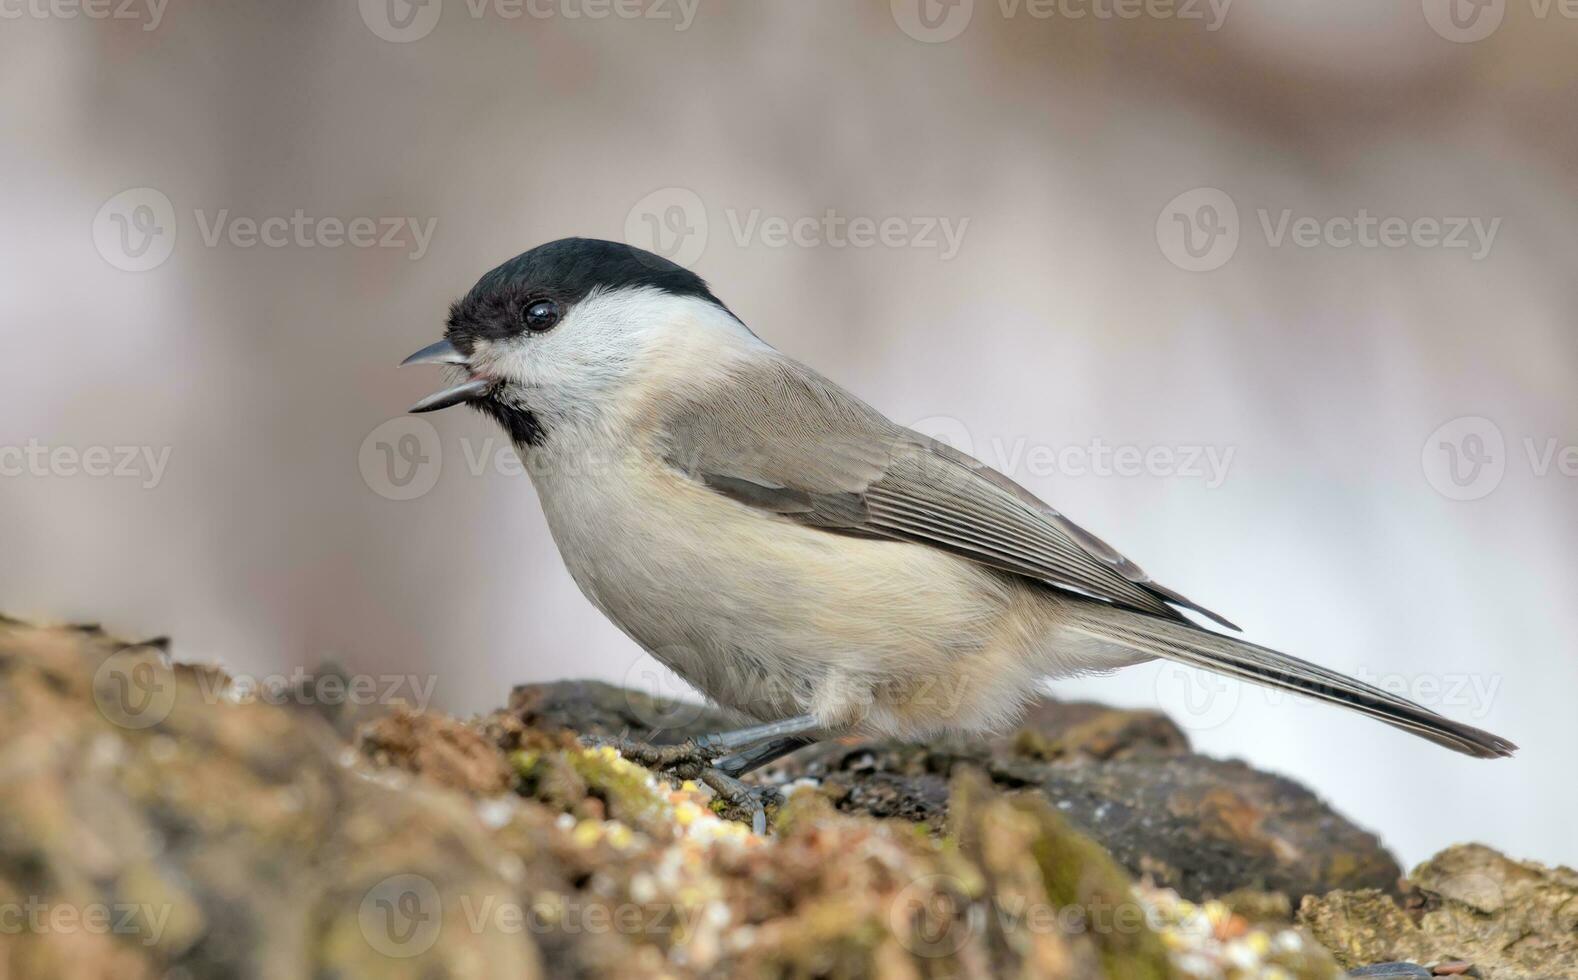 Calling Marsh Tit - Poecile palustris - with wide open beak nice perched on tree stump with clean winter background photo